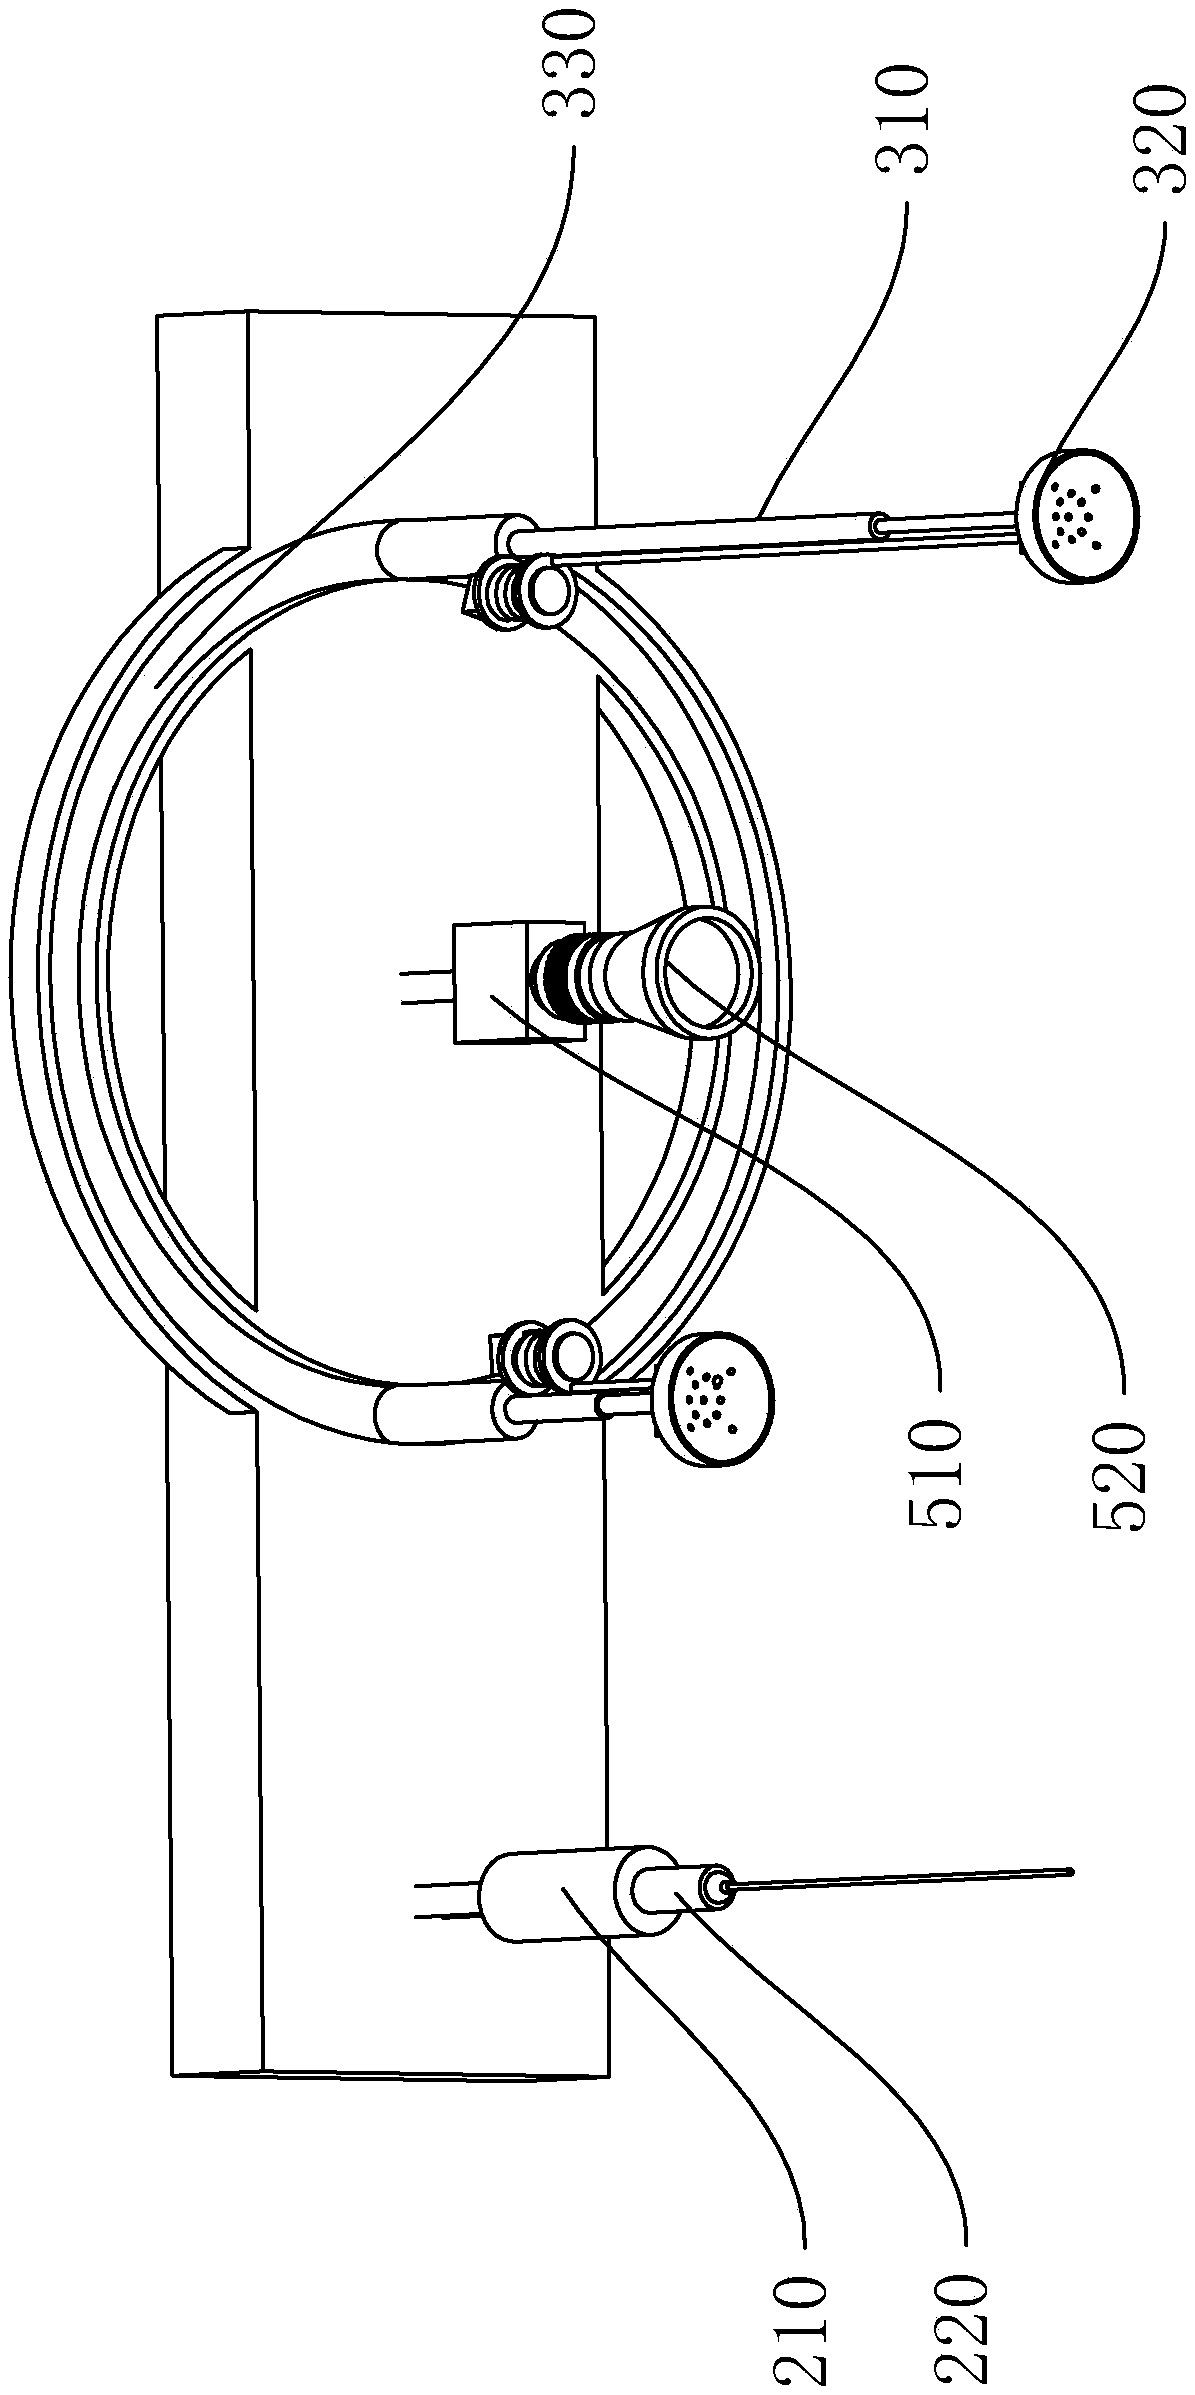 Device and method for gender identification of egg embryo based on heart rate measurement